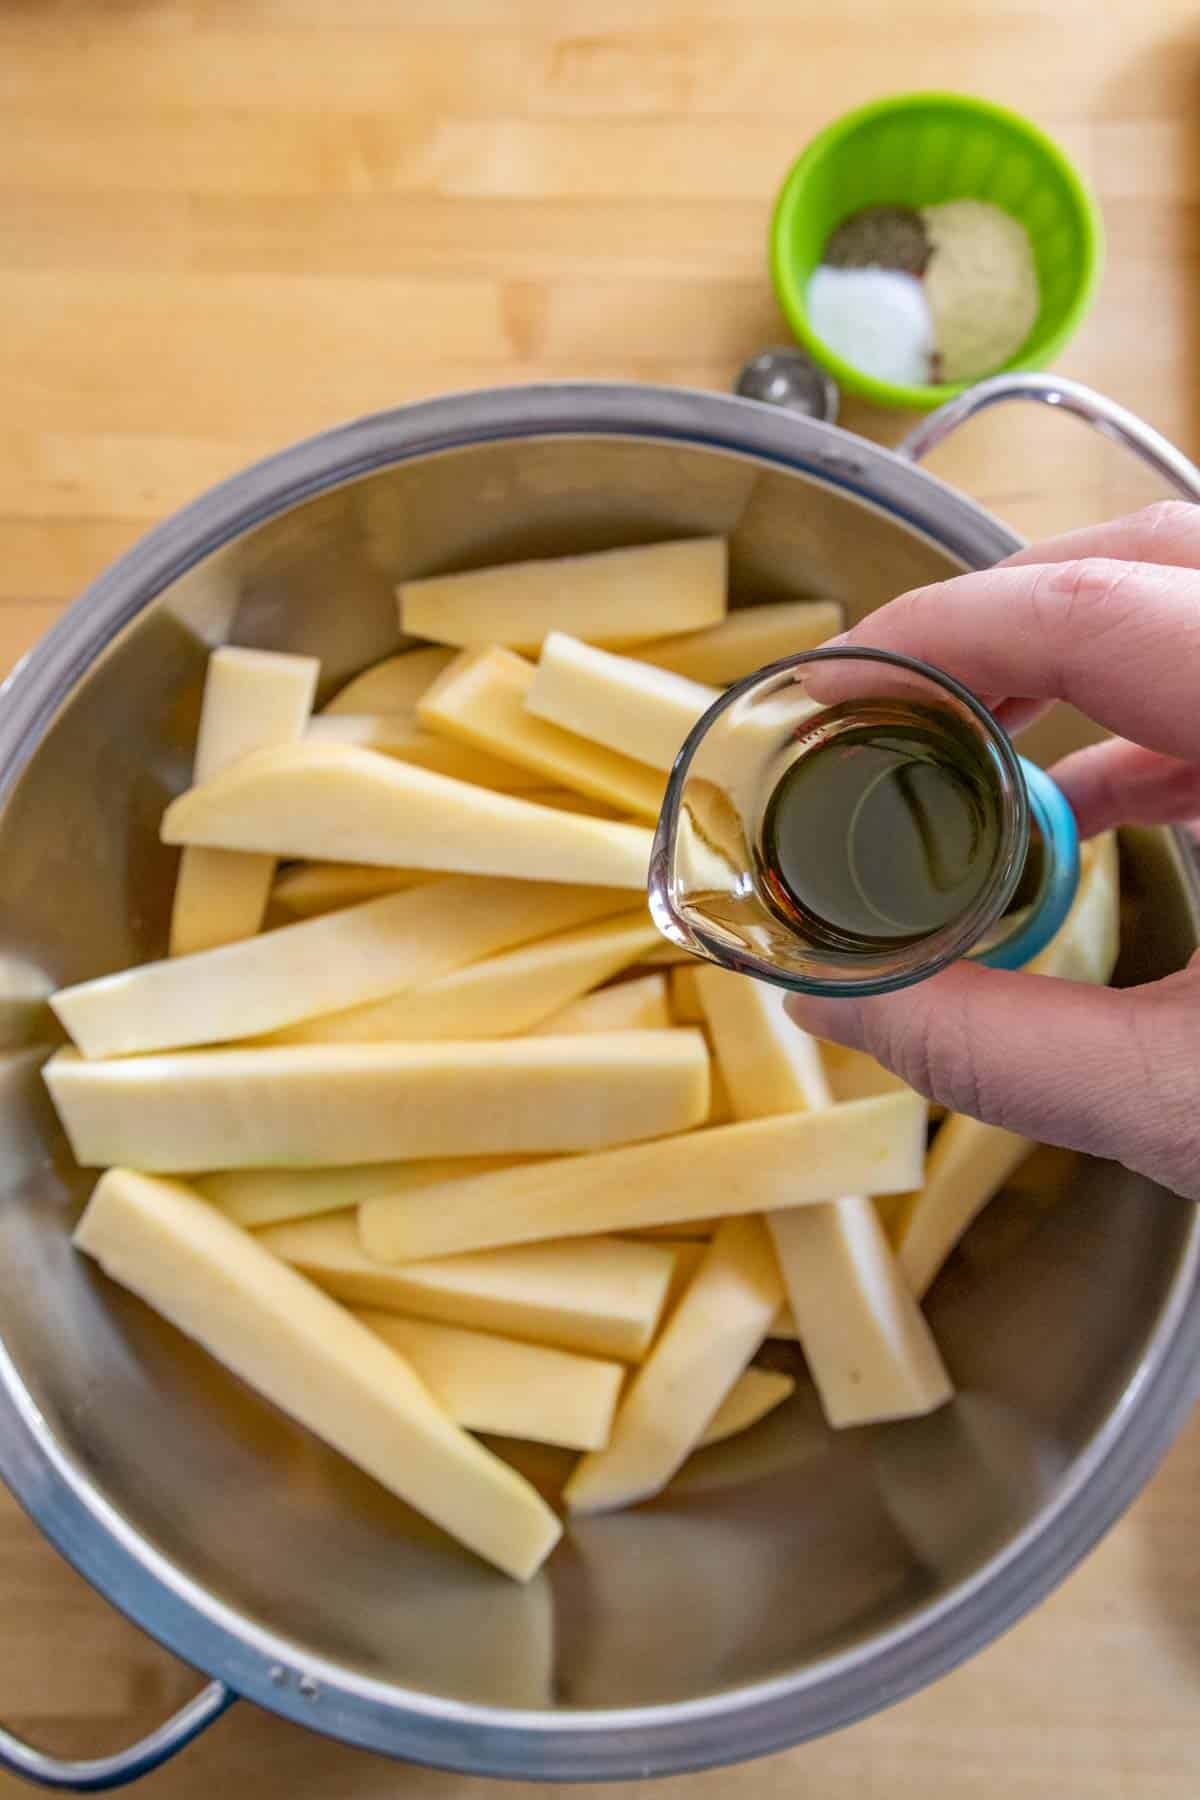 Pouring olive oil on rutabaga fries in a bowl.